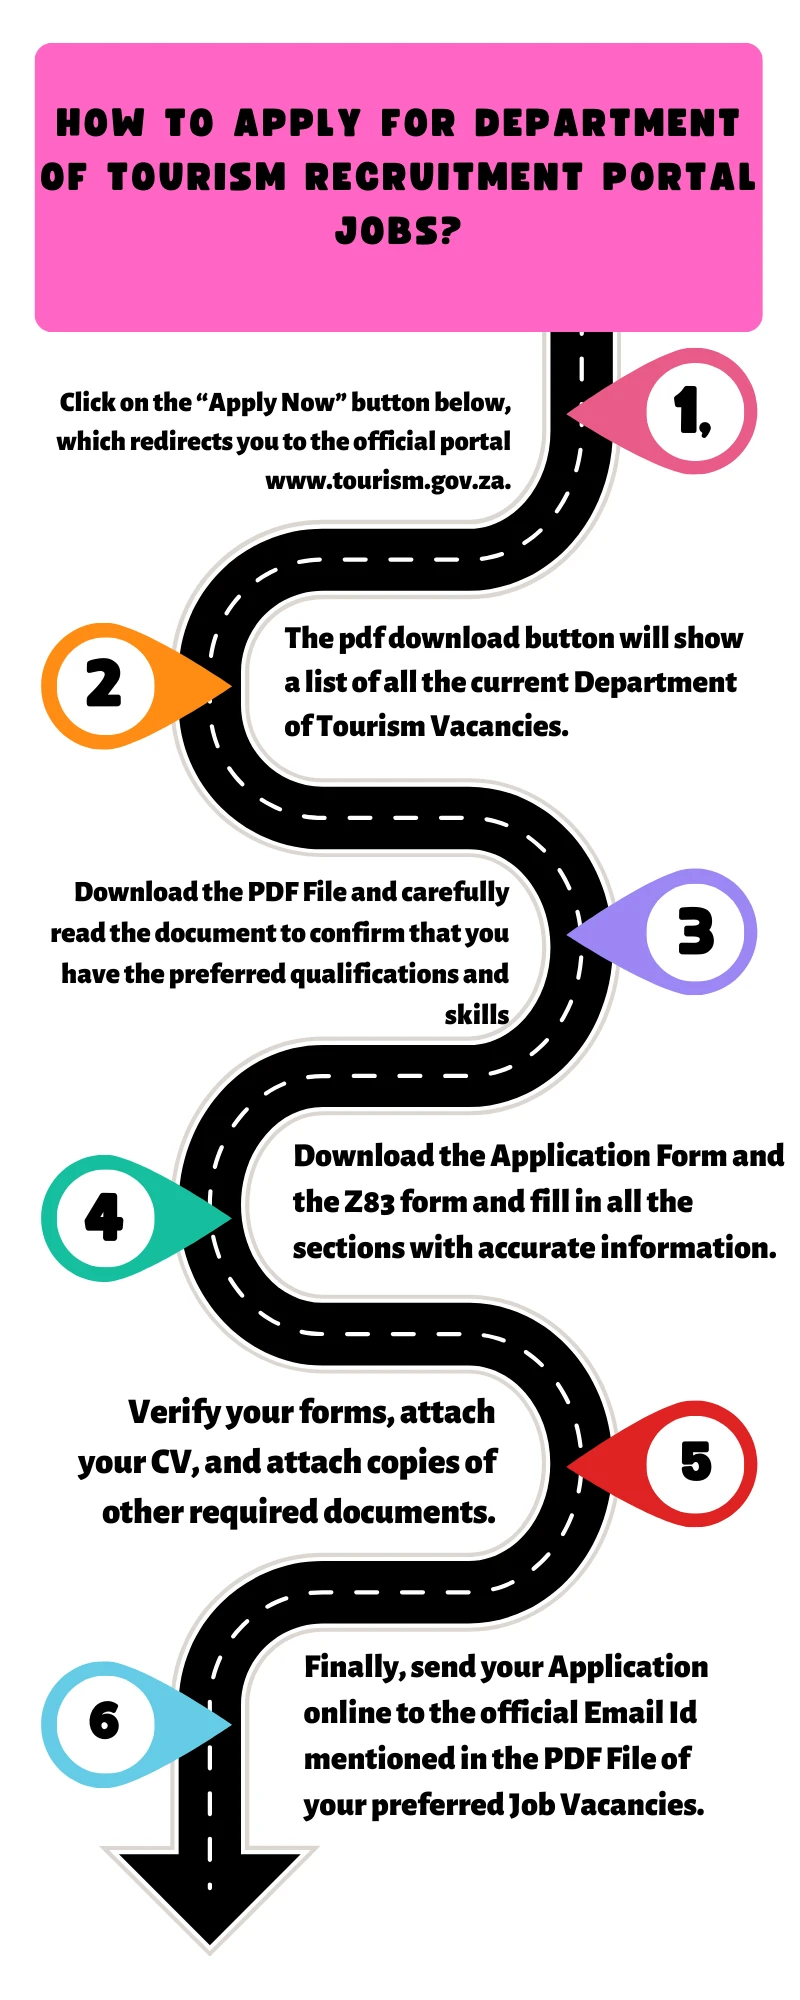 How To Apply for Department of Tourism Recruitment Portal Jobs?